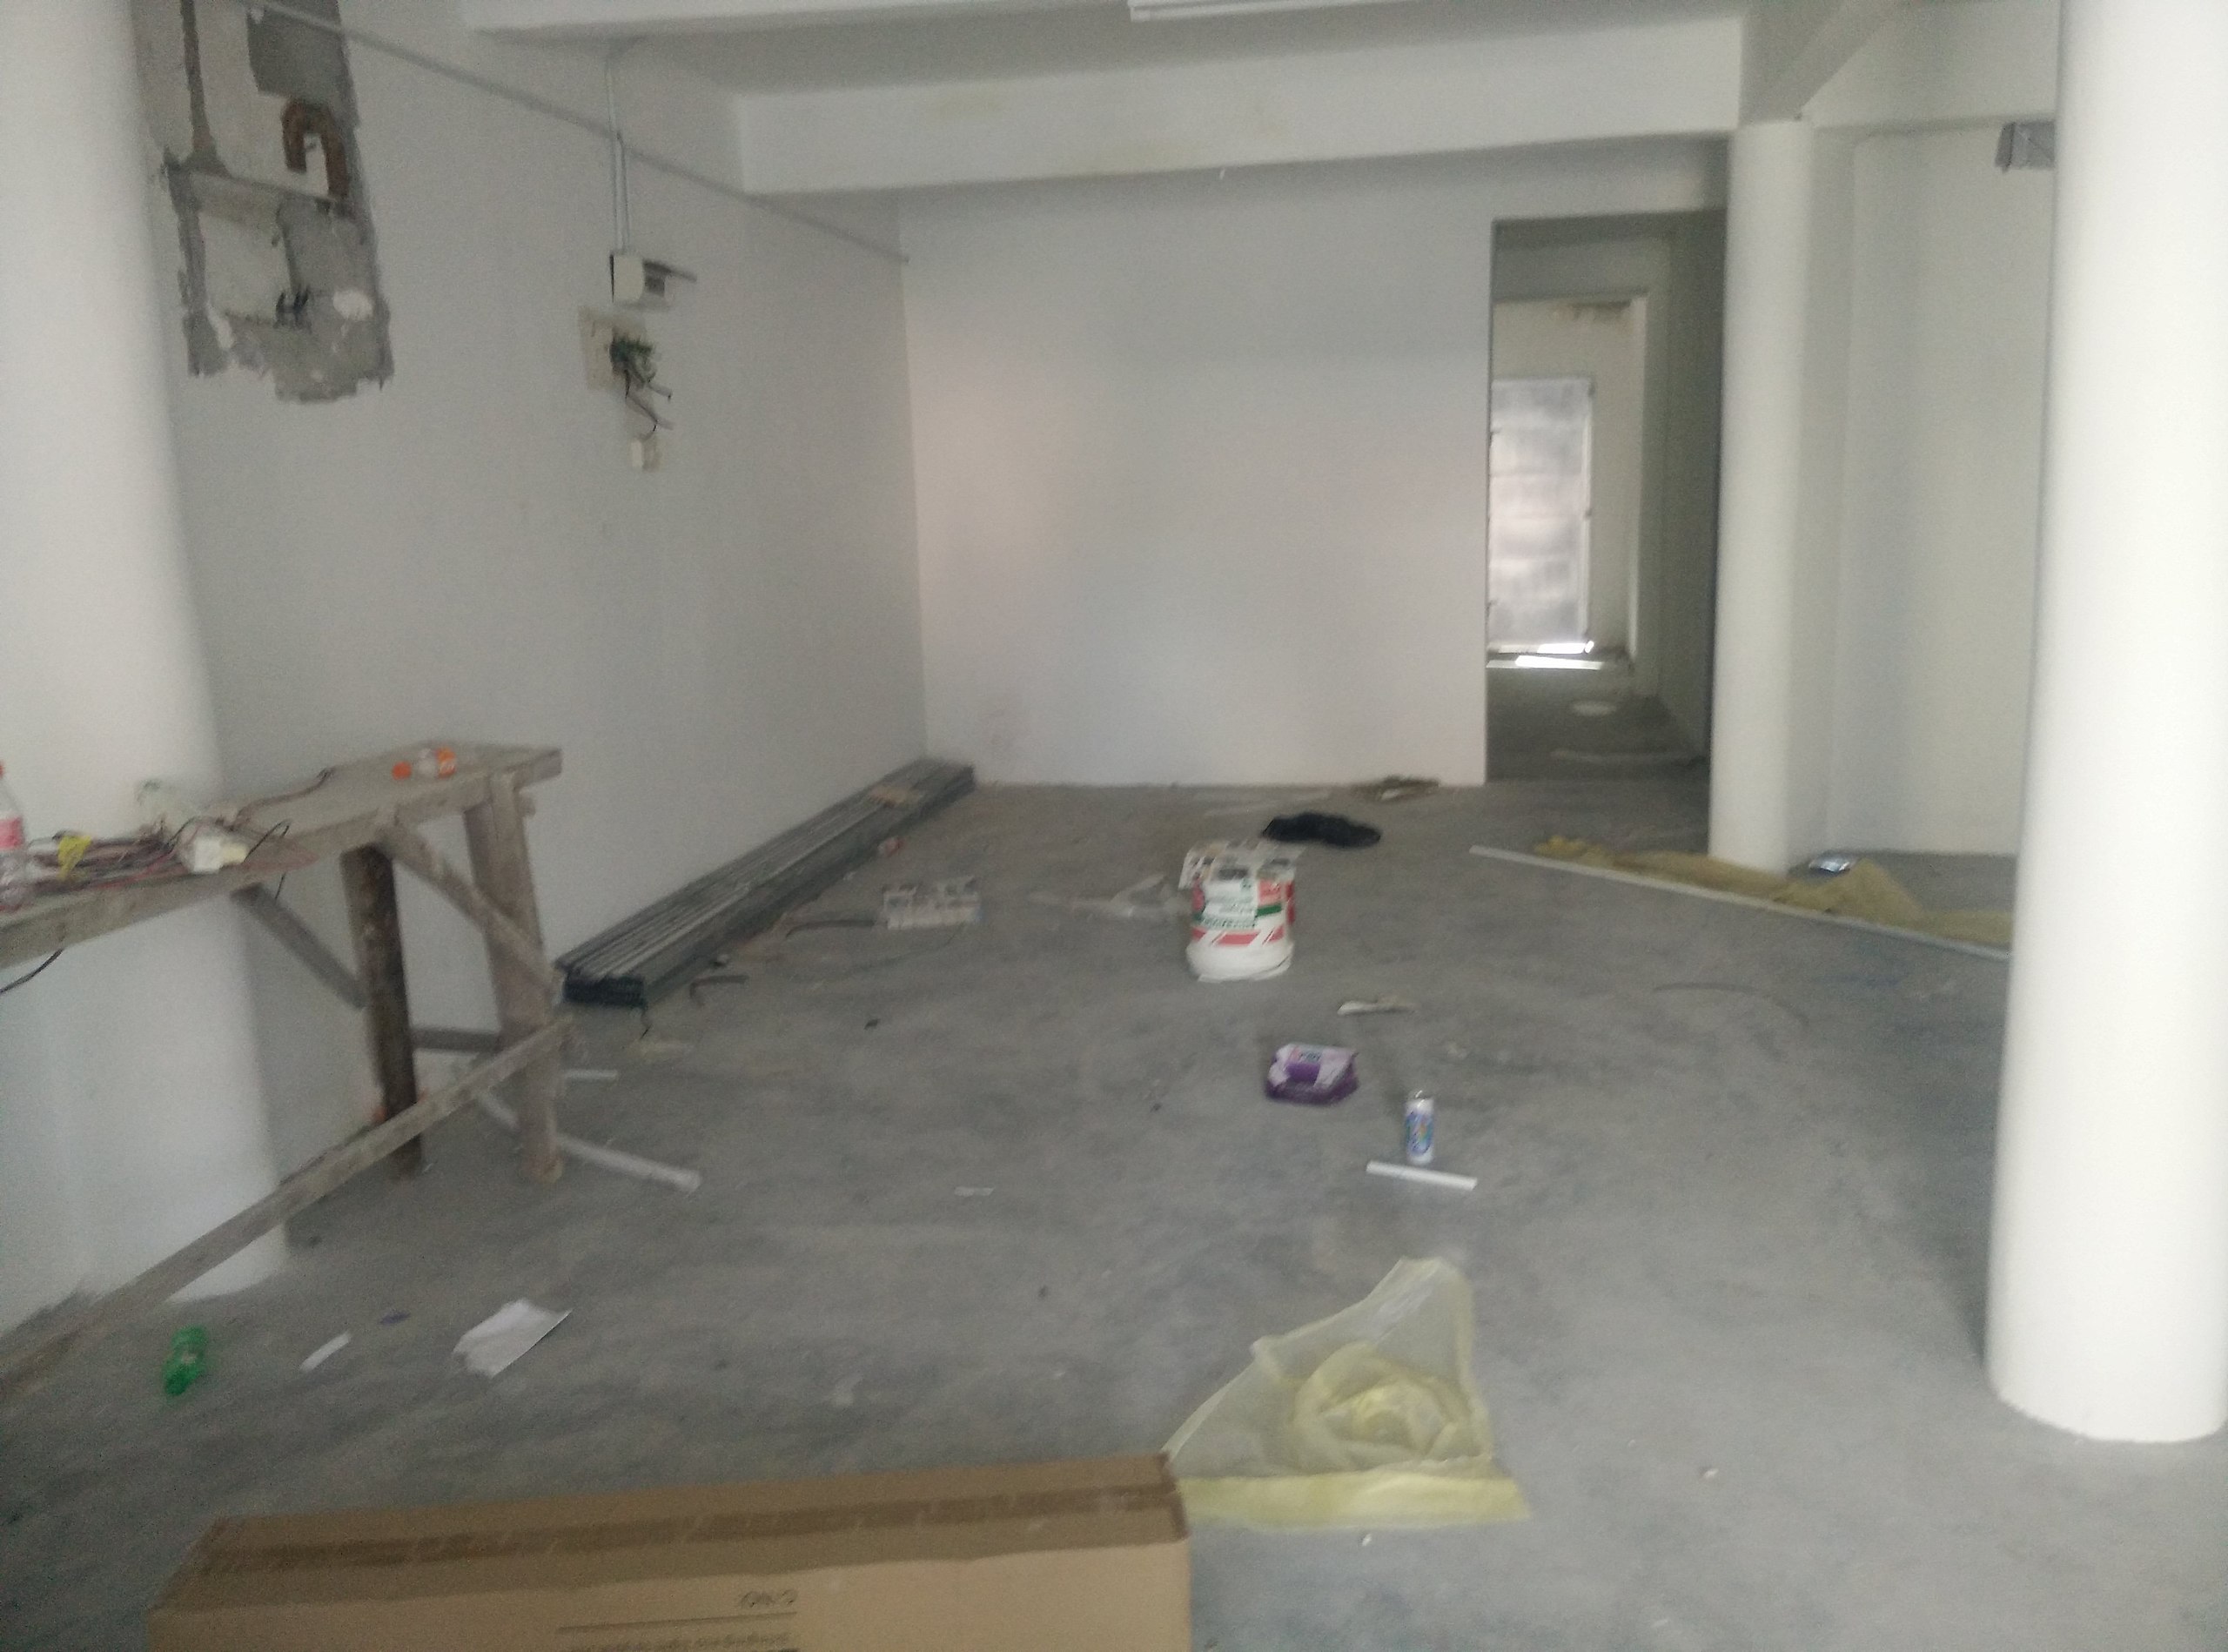 2560px-Renovation_of_a_two-storey_terraced_house_in_Selangor%2C_Malaysia_20191123_102051.jpg